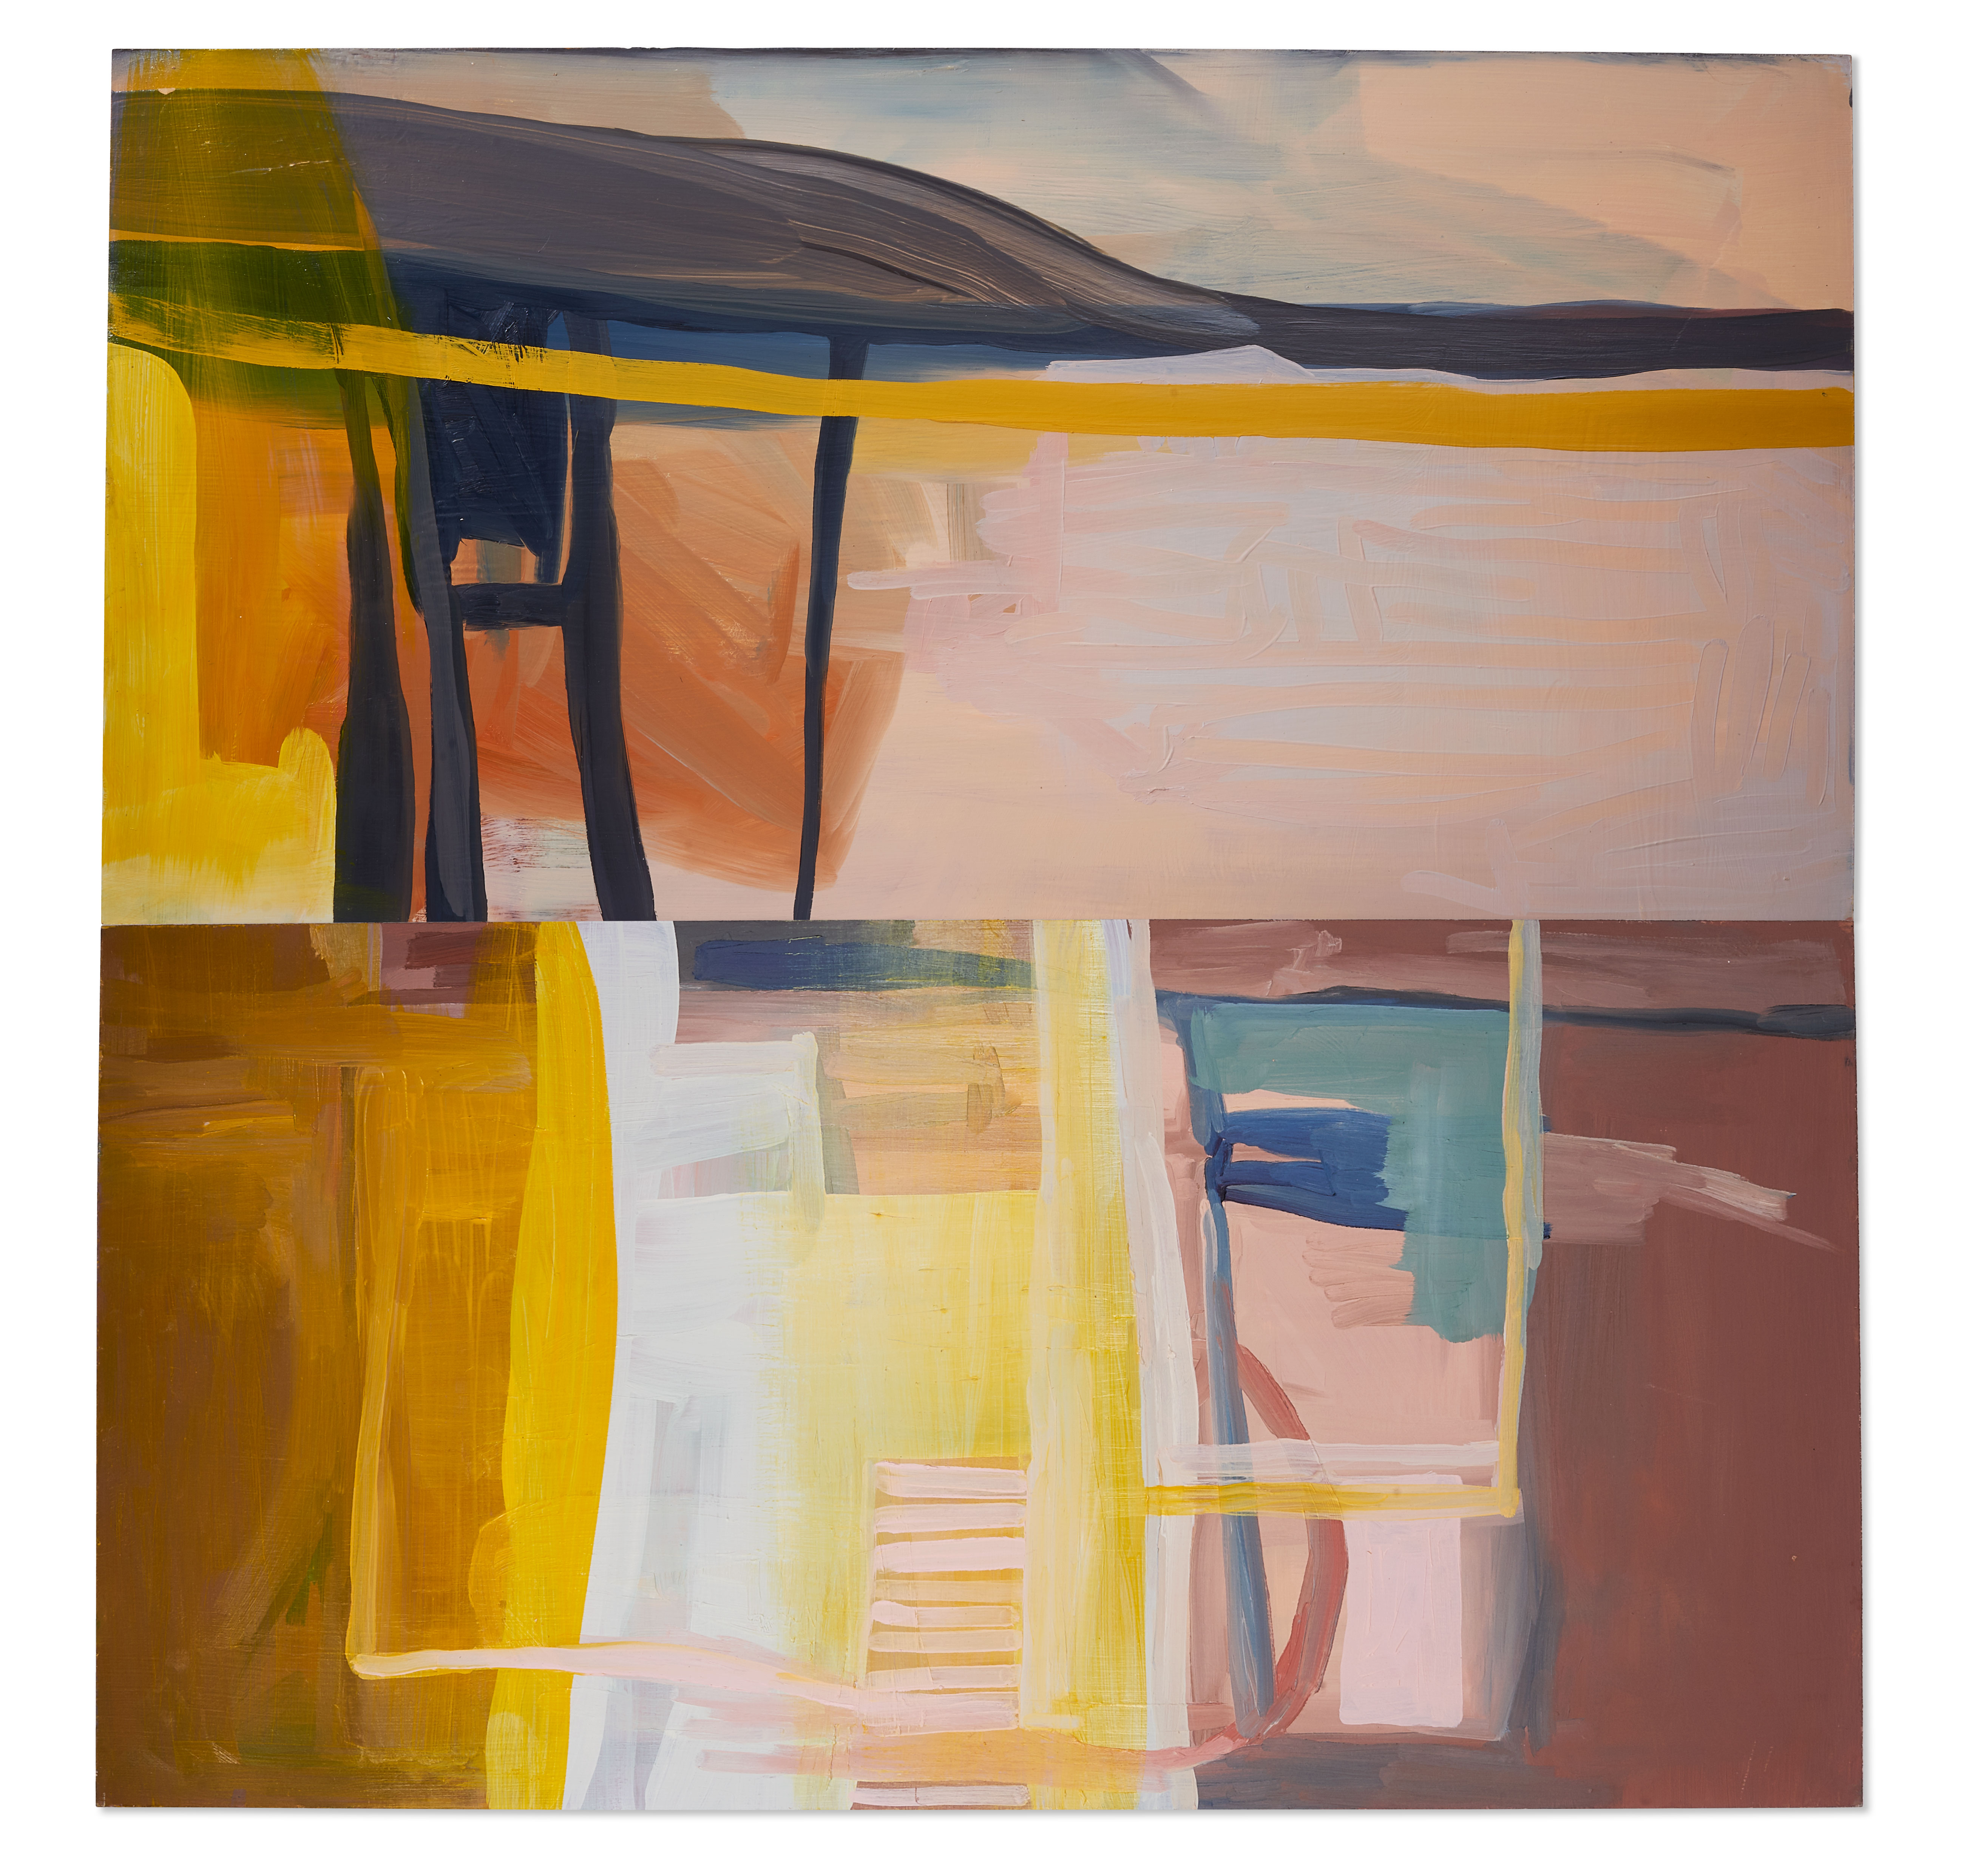 A photograph of a square abstract painting by the artist Caroline Coolidge. The dulled pink, orange, yellow, blue, and white colors are consistent throughout the painting, however, the directions of the strokes change in the center of the painting, giving the illusion that it is divided in half.